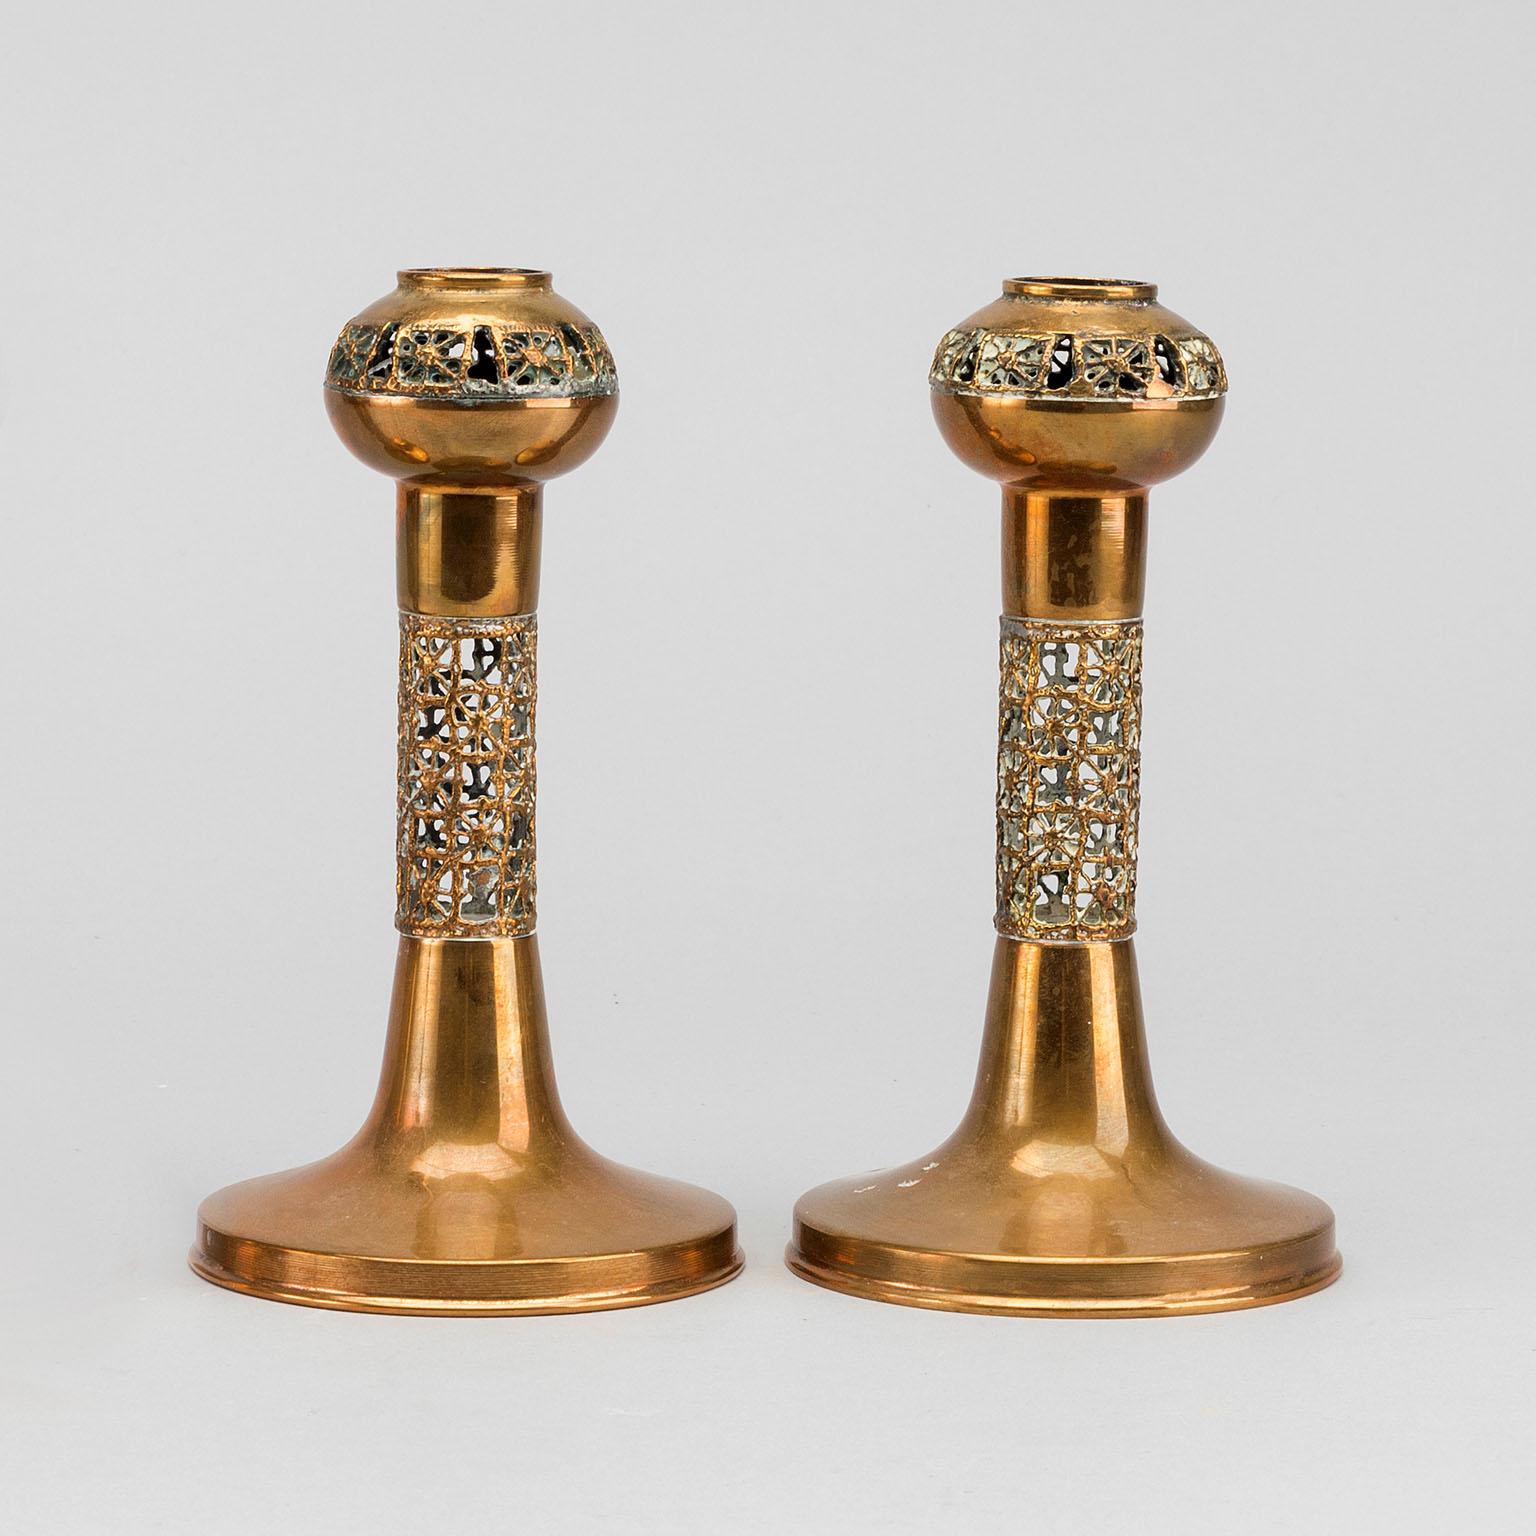 Pentti Sarpaneva, for Turun Hopea, pair of brass ‘Pitsi’ or ‘Lace’ candlesticks, Finland, circa 1975.
A pair of Brutalist gilt bronze Scandinavian candleholders of the seventies.
Laced bronze open workaround, on the stem and the sconce. Maker's mark